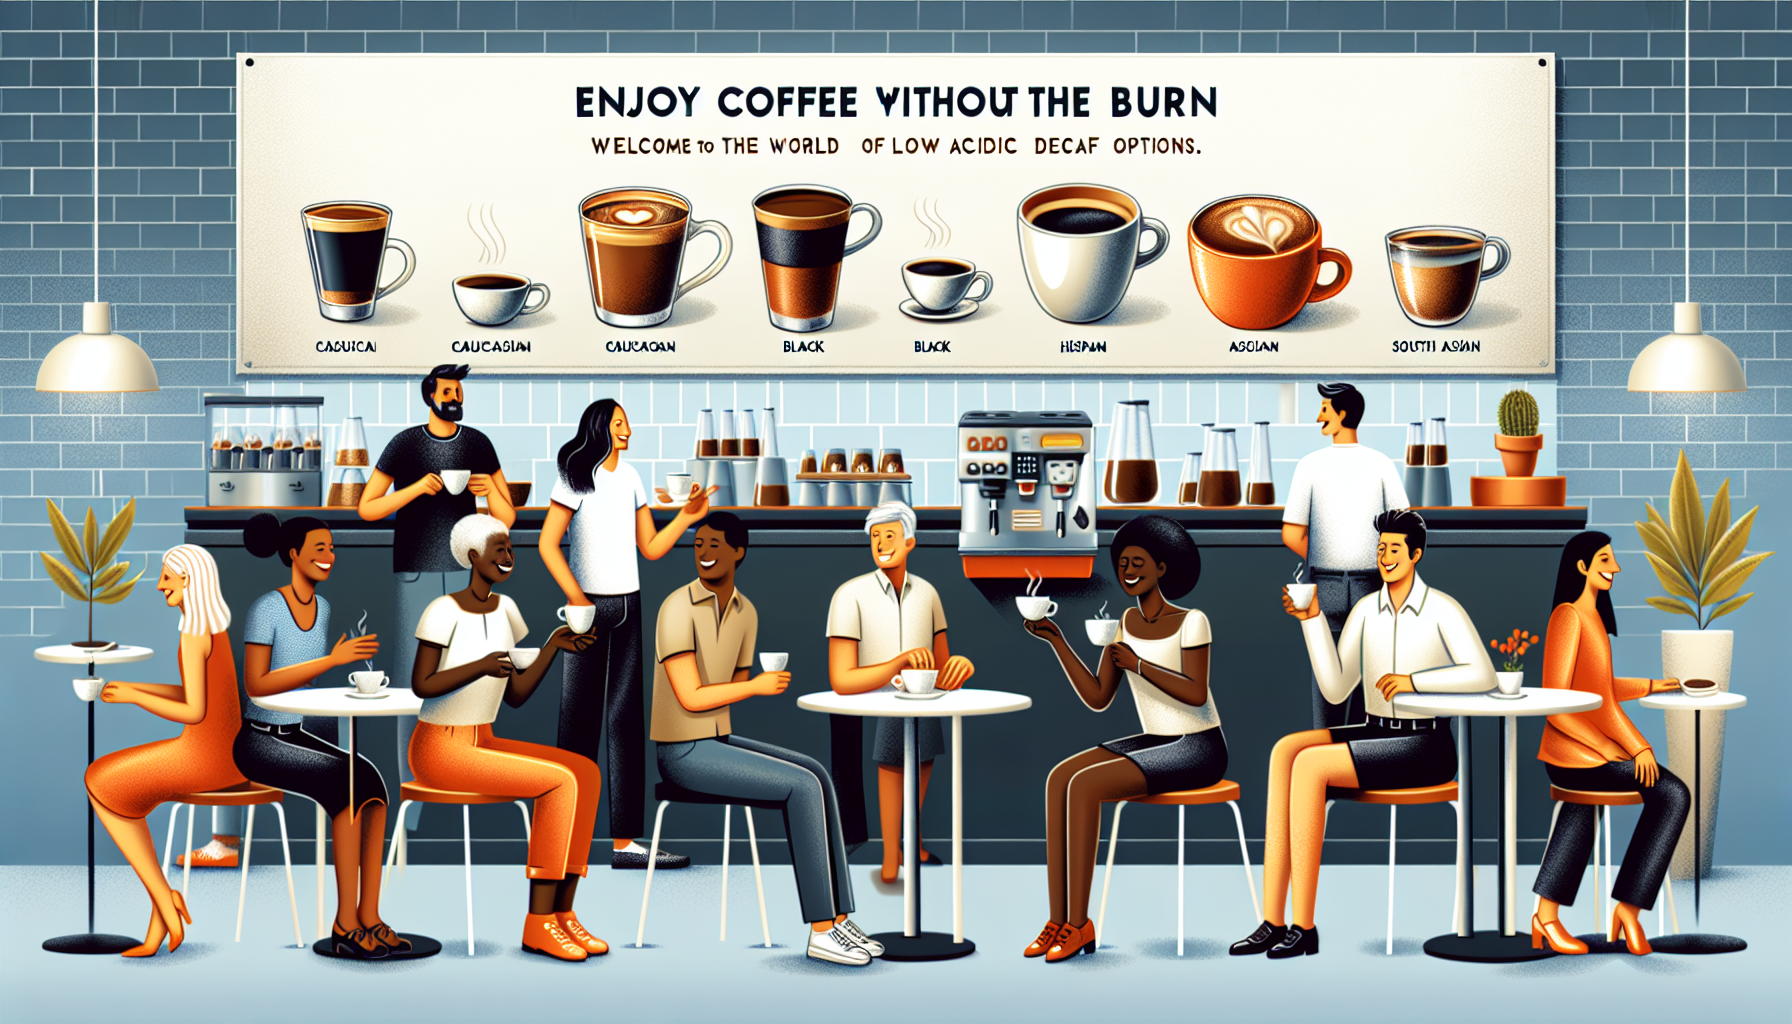 An illustration showing the rise of low acidic decaf coffee options. There is a contemporary coffee shop setting with people from different descents such as Caucasian, Black, Hispanic, and South Asian